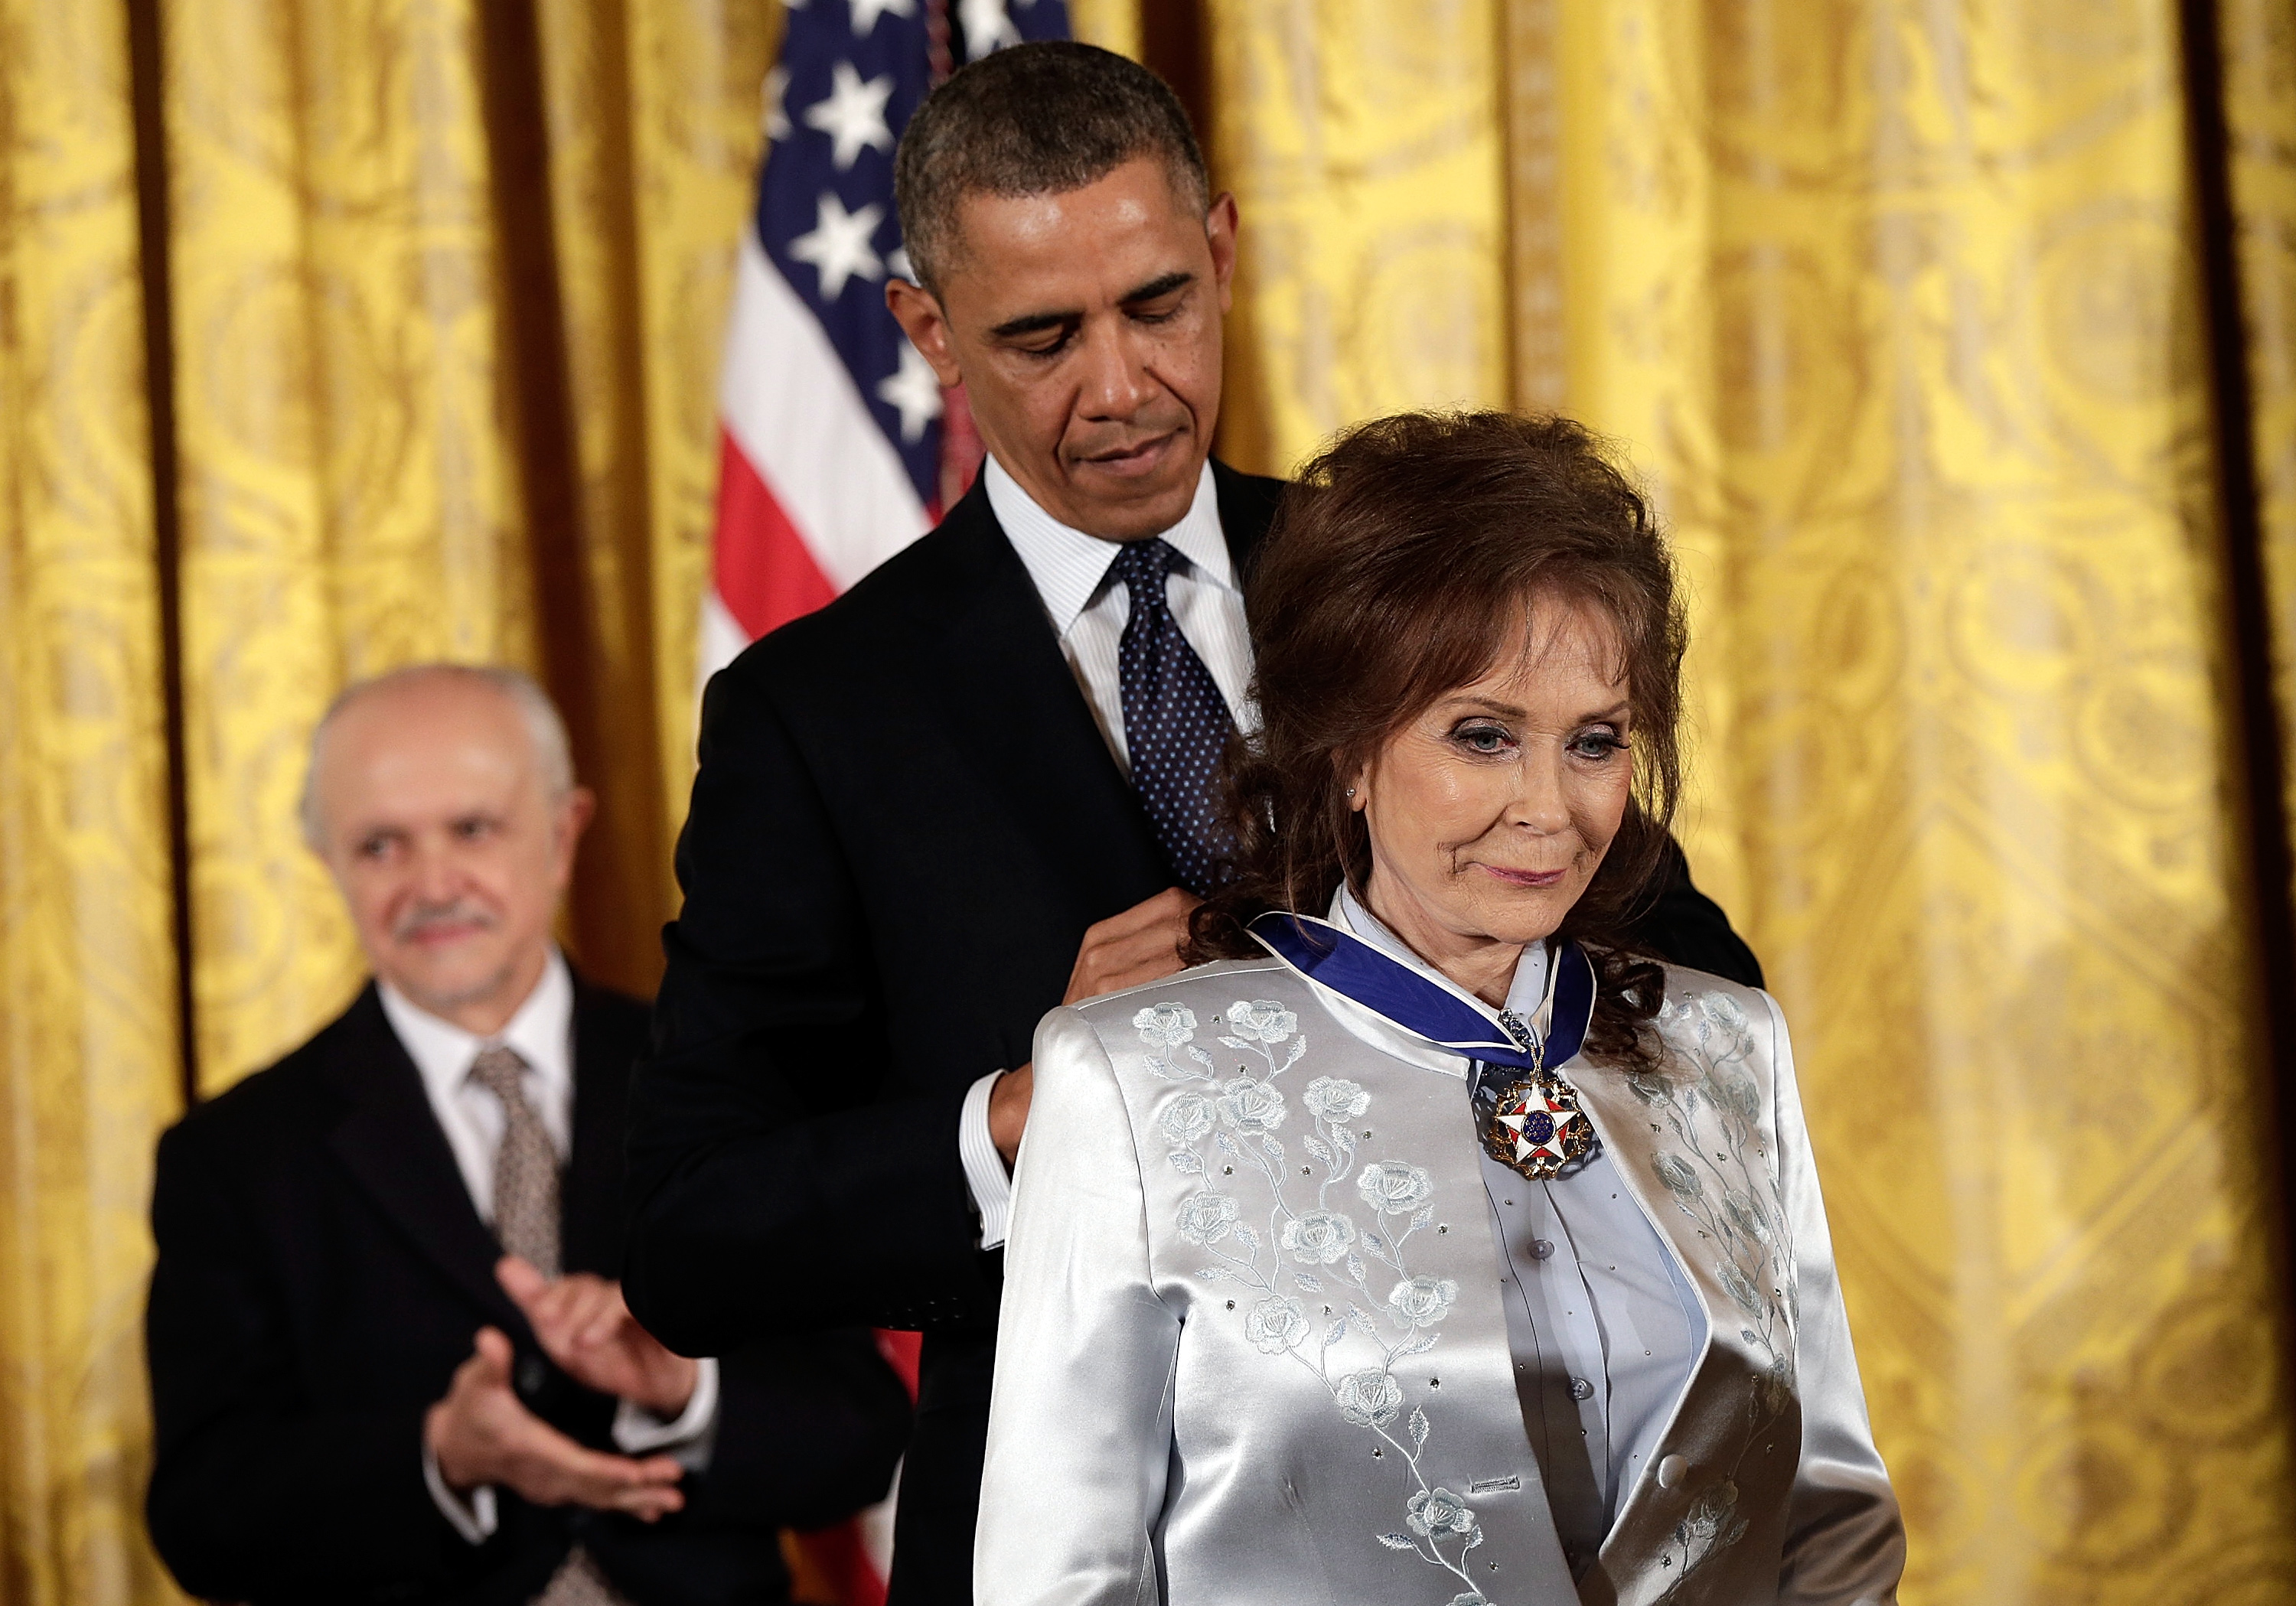 Barack Obama awards the Presidential Medal of Freedom to Loretta Lynn in the East Room at the White House in Washington, DC, on November 20, 2013. | Source: Getty Images